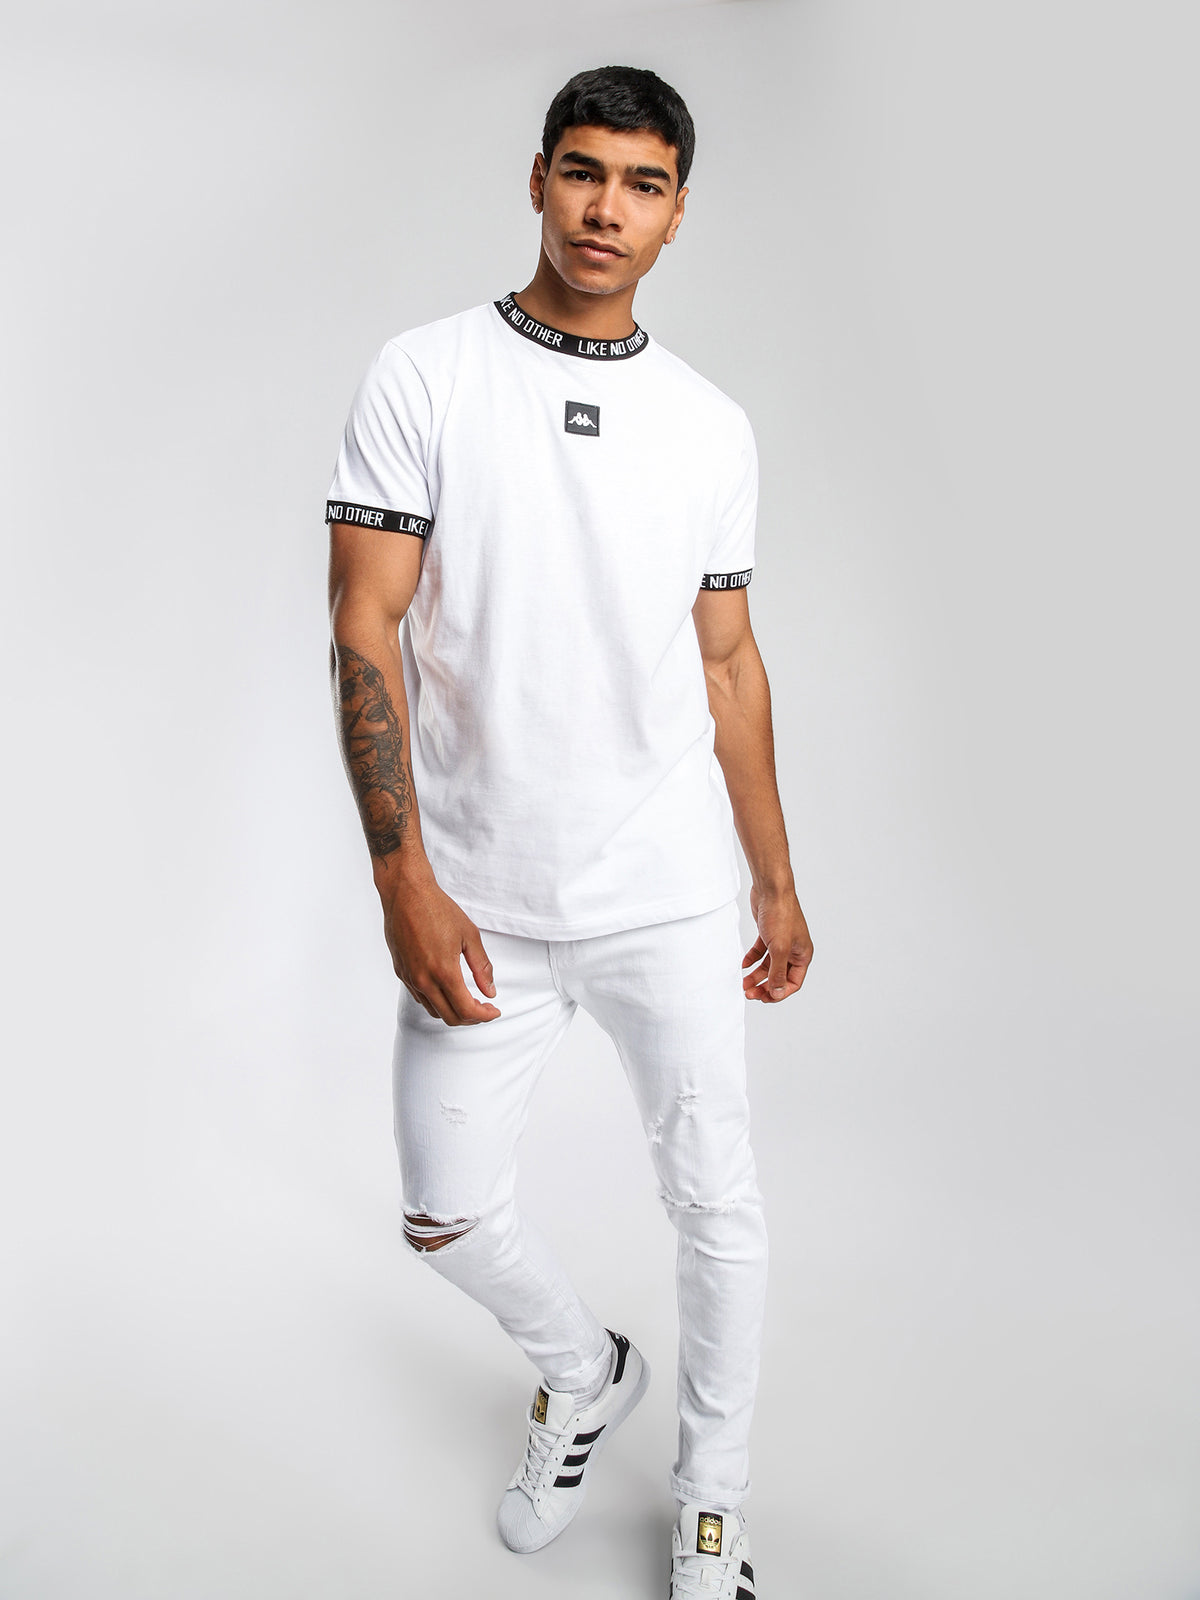 Authentic Basco T-Shirt in White